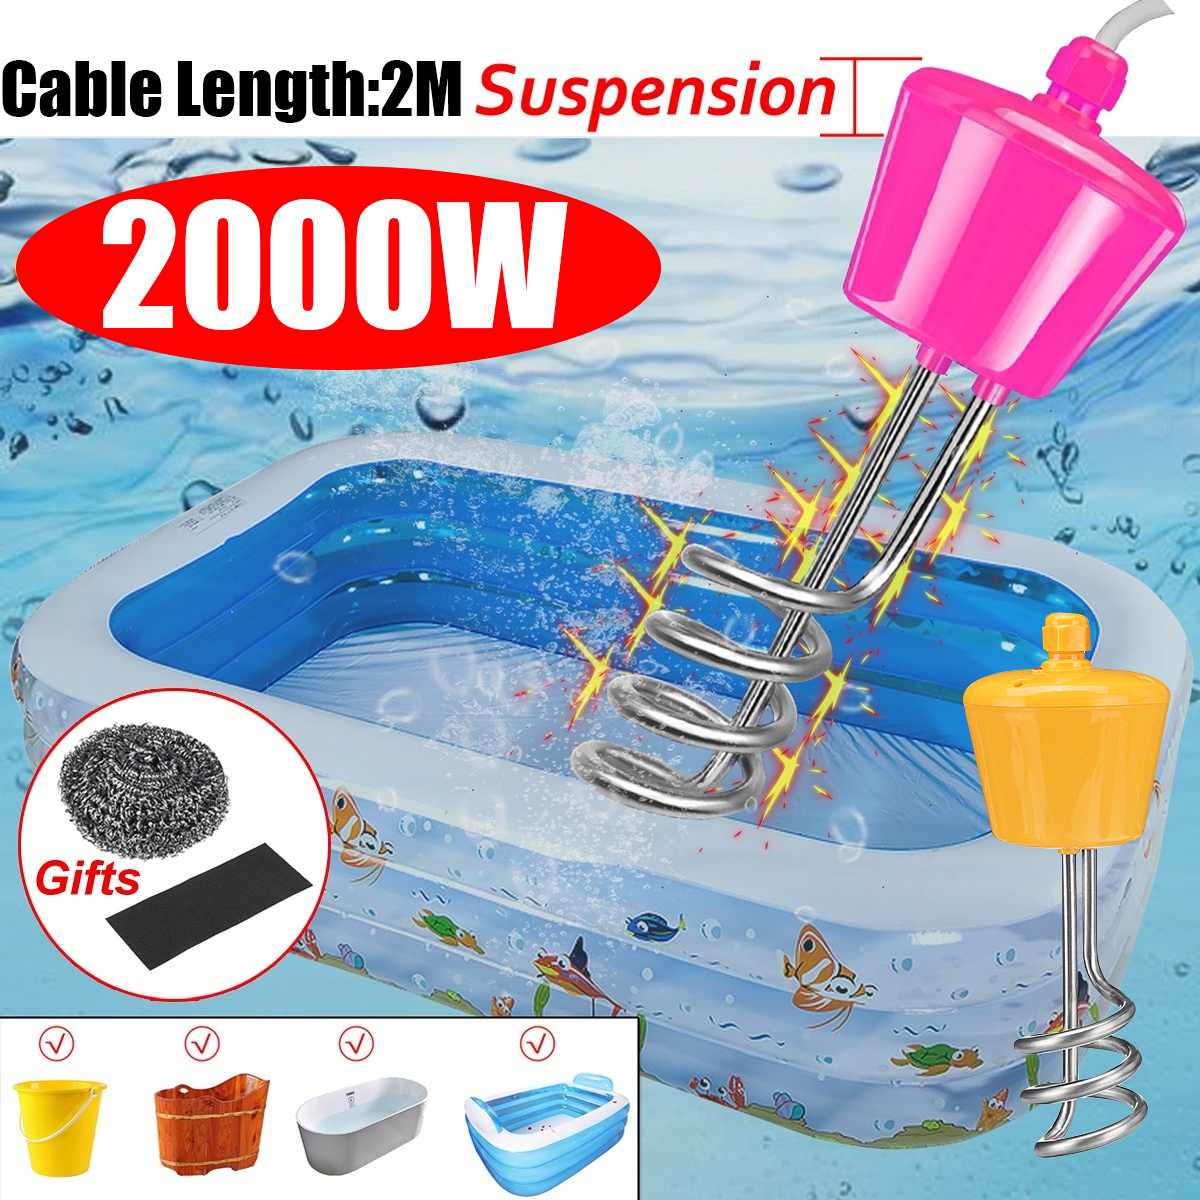 2000W Portable Suspension Electric Water Heater Element Boiler for Inflatable Pool Tub Travel Camping Water Heating Element